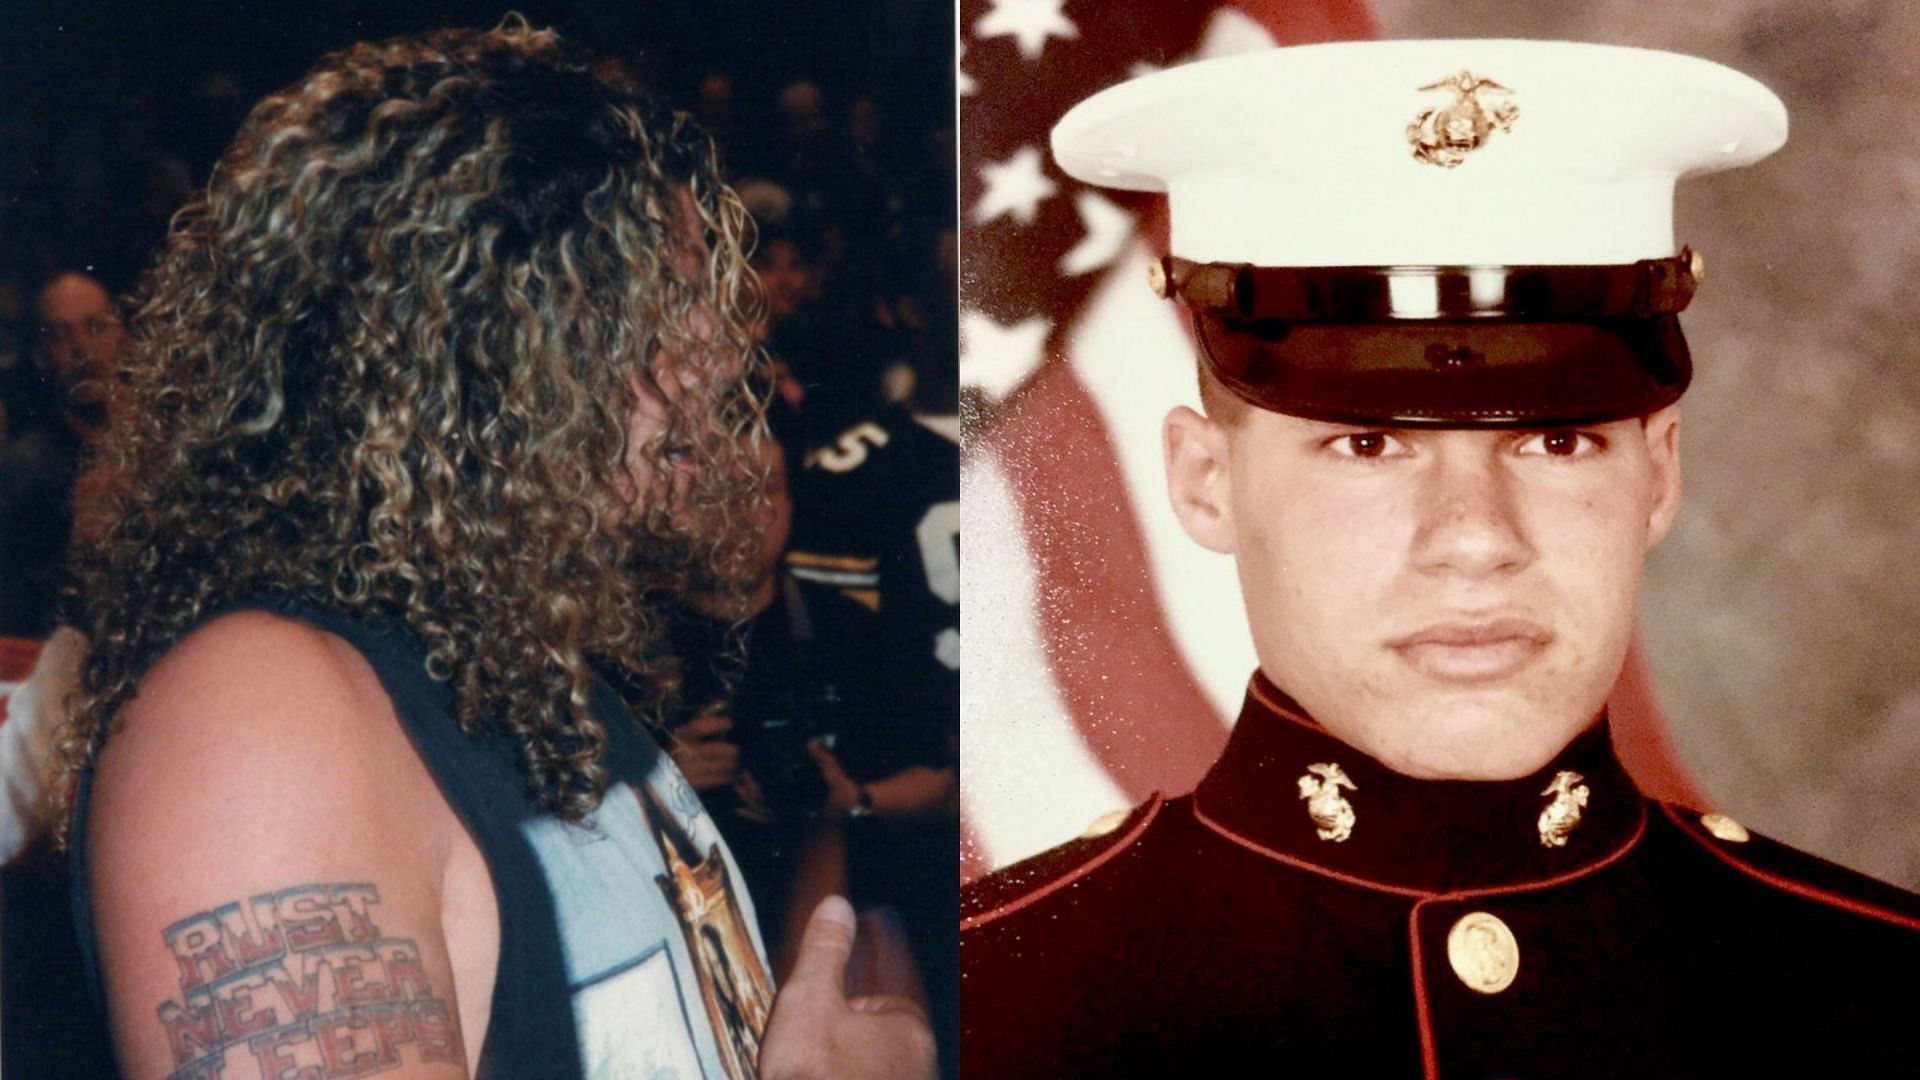 Former WWE Superstar Raven spent 6 years in the Marine Corps